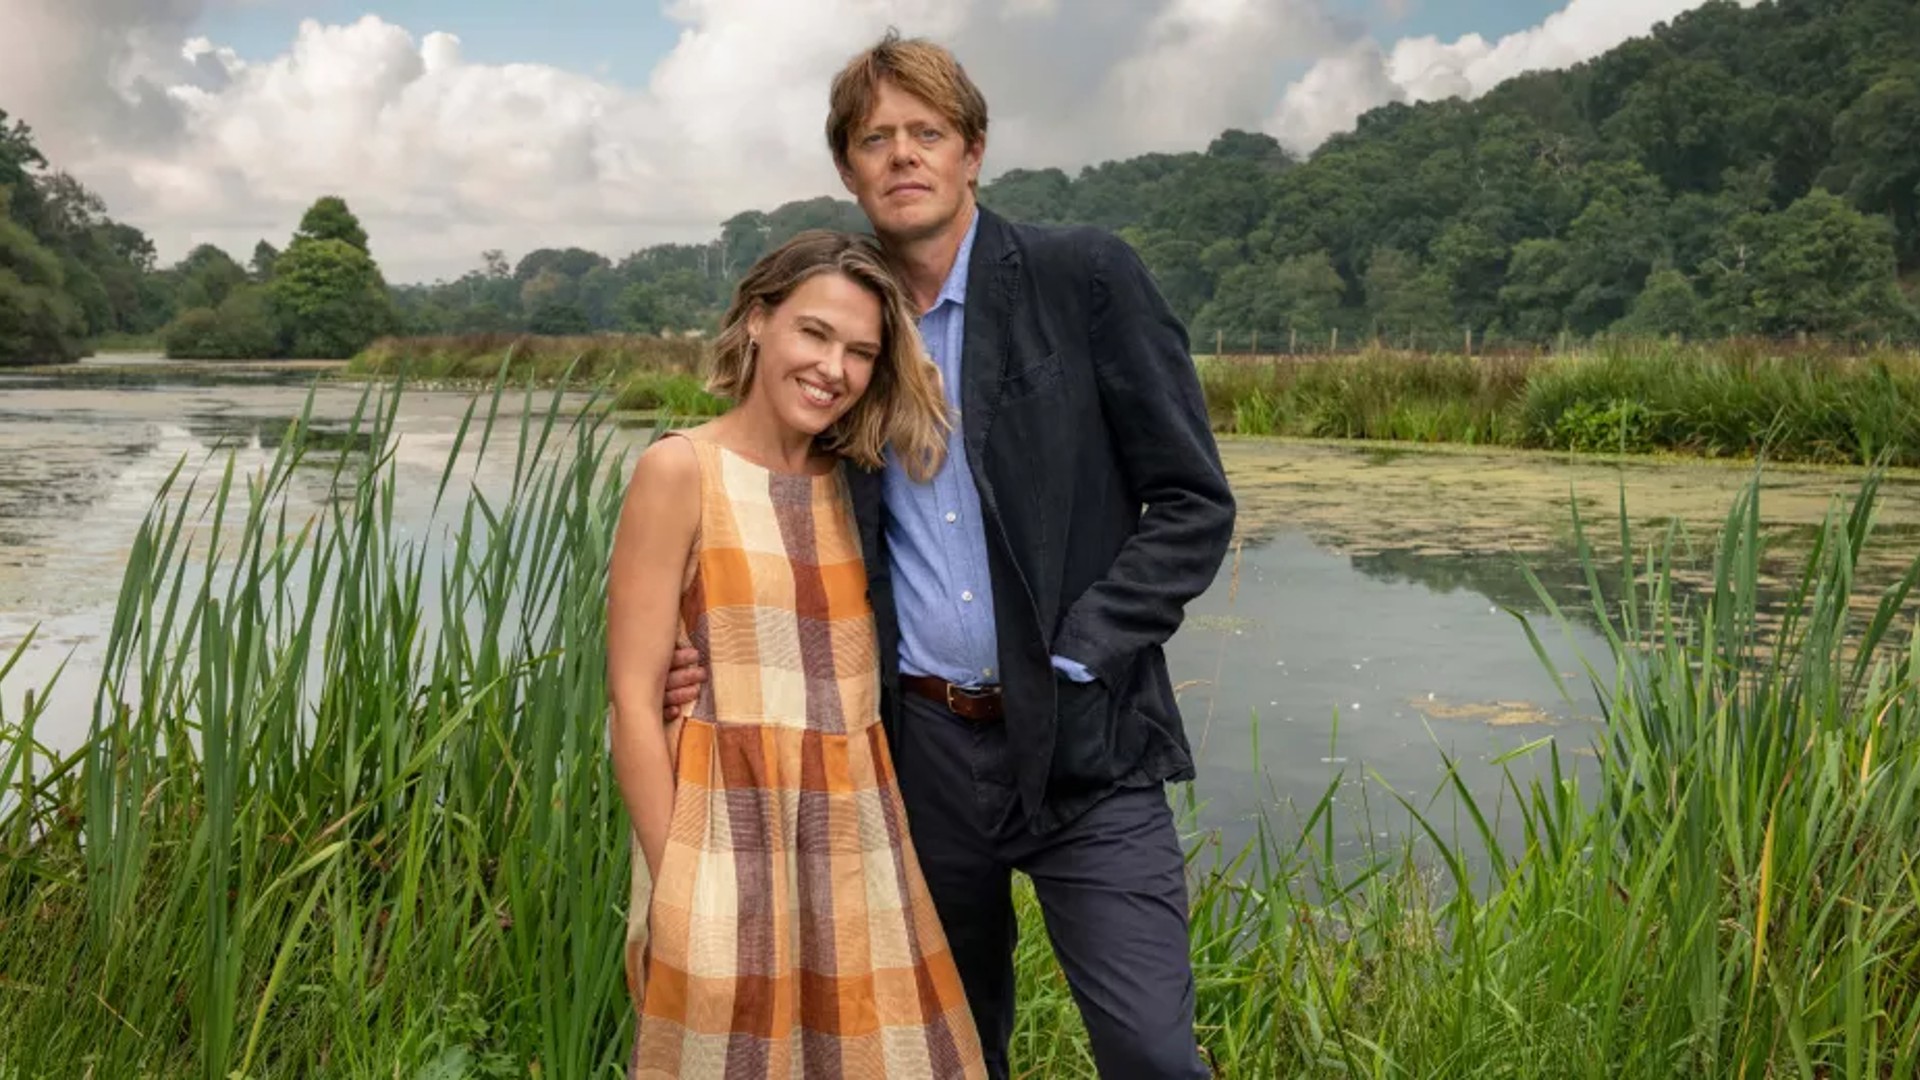 Kris Marshall and Sally Bretton in 'Beyond Paradise'